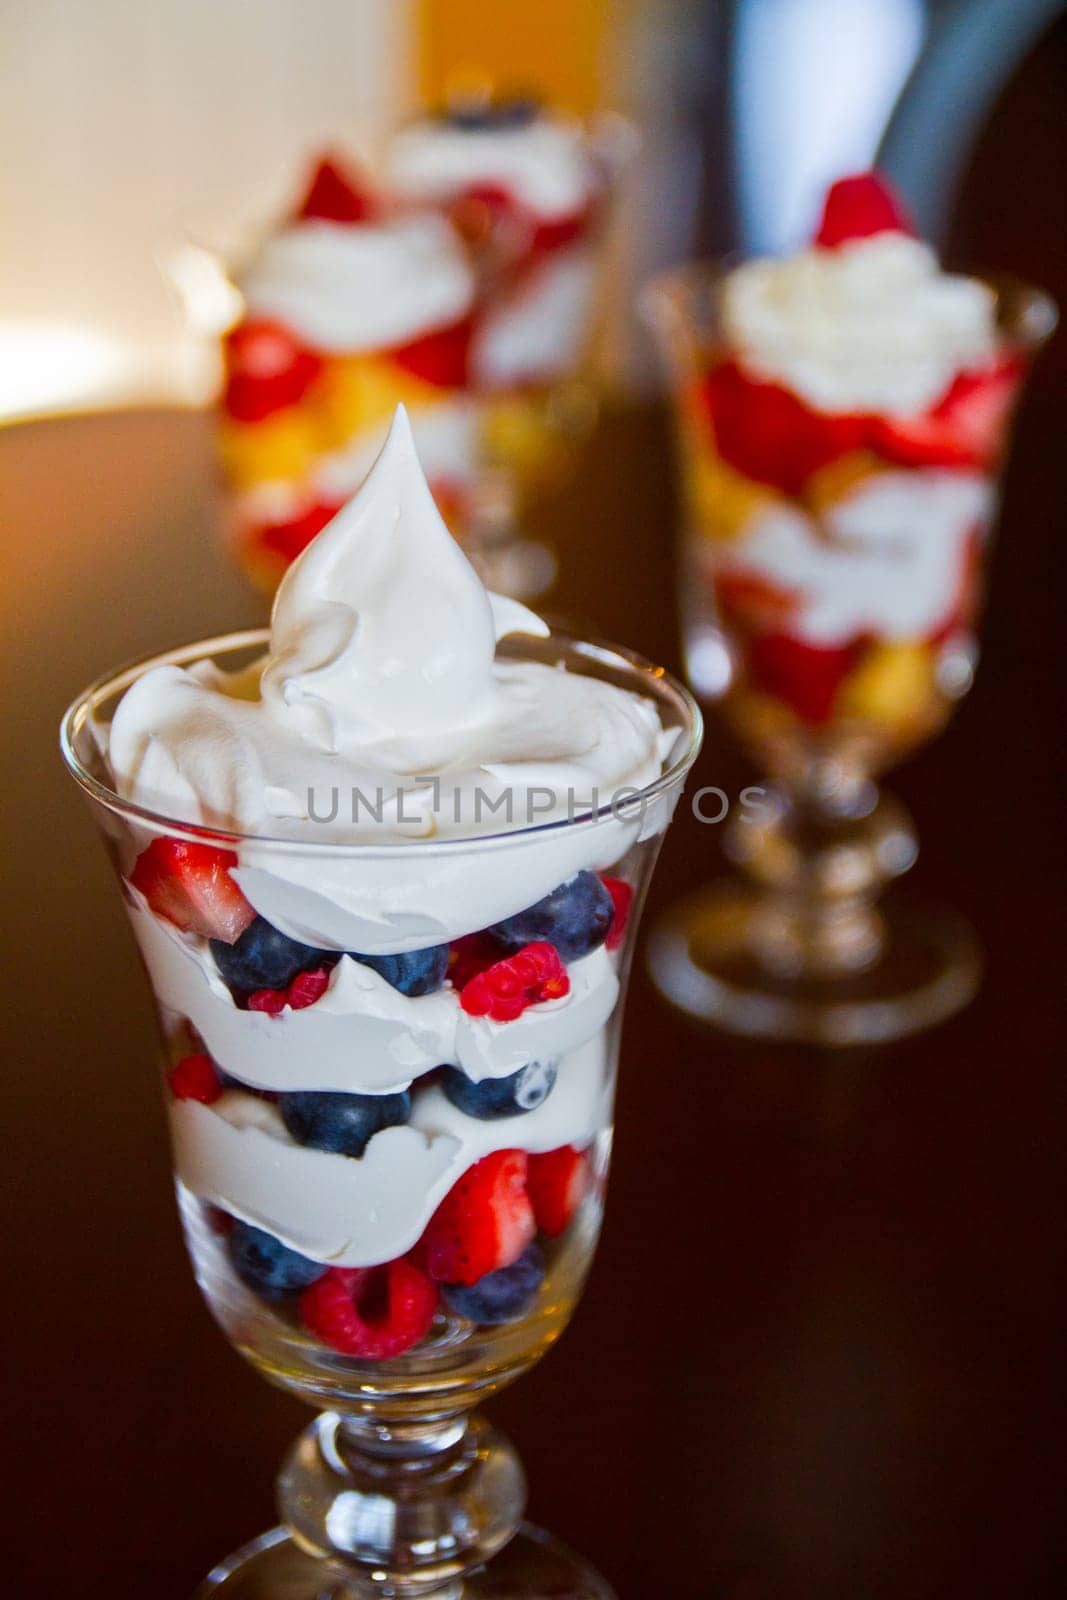 Indulge in layers of fruity bliss with this vibrant dessert featuring plump blueberries, ripe strawberries, and creamy swirls. Perfect for food and dining businesses seeking fresh and homemade appeal.